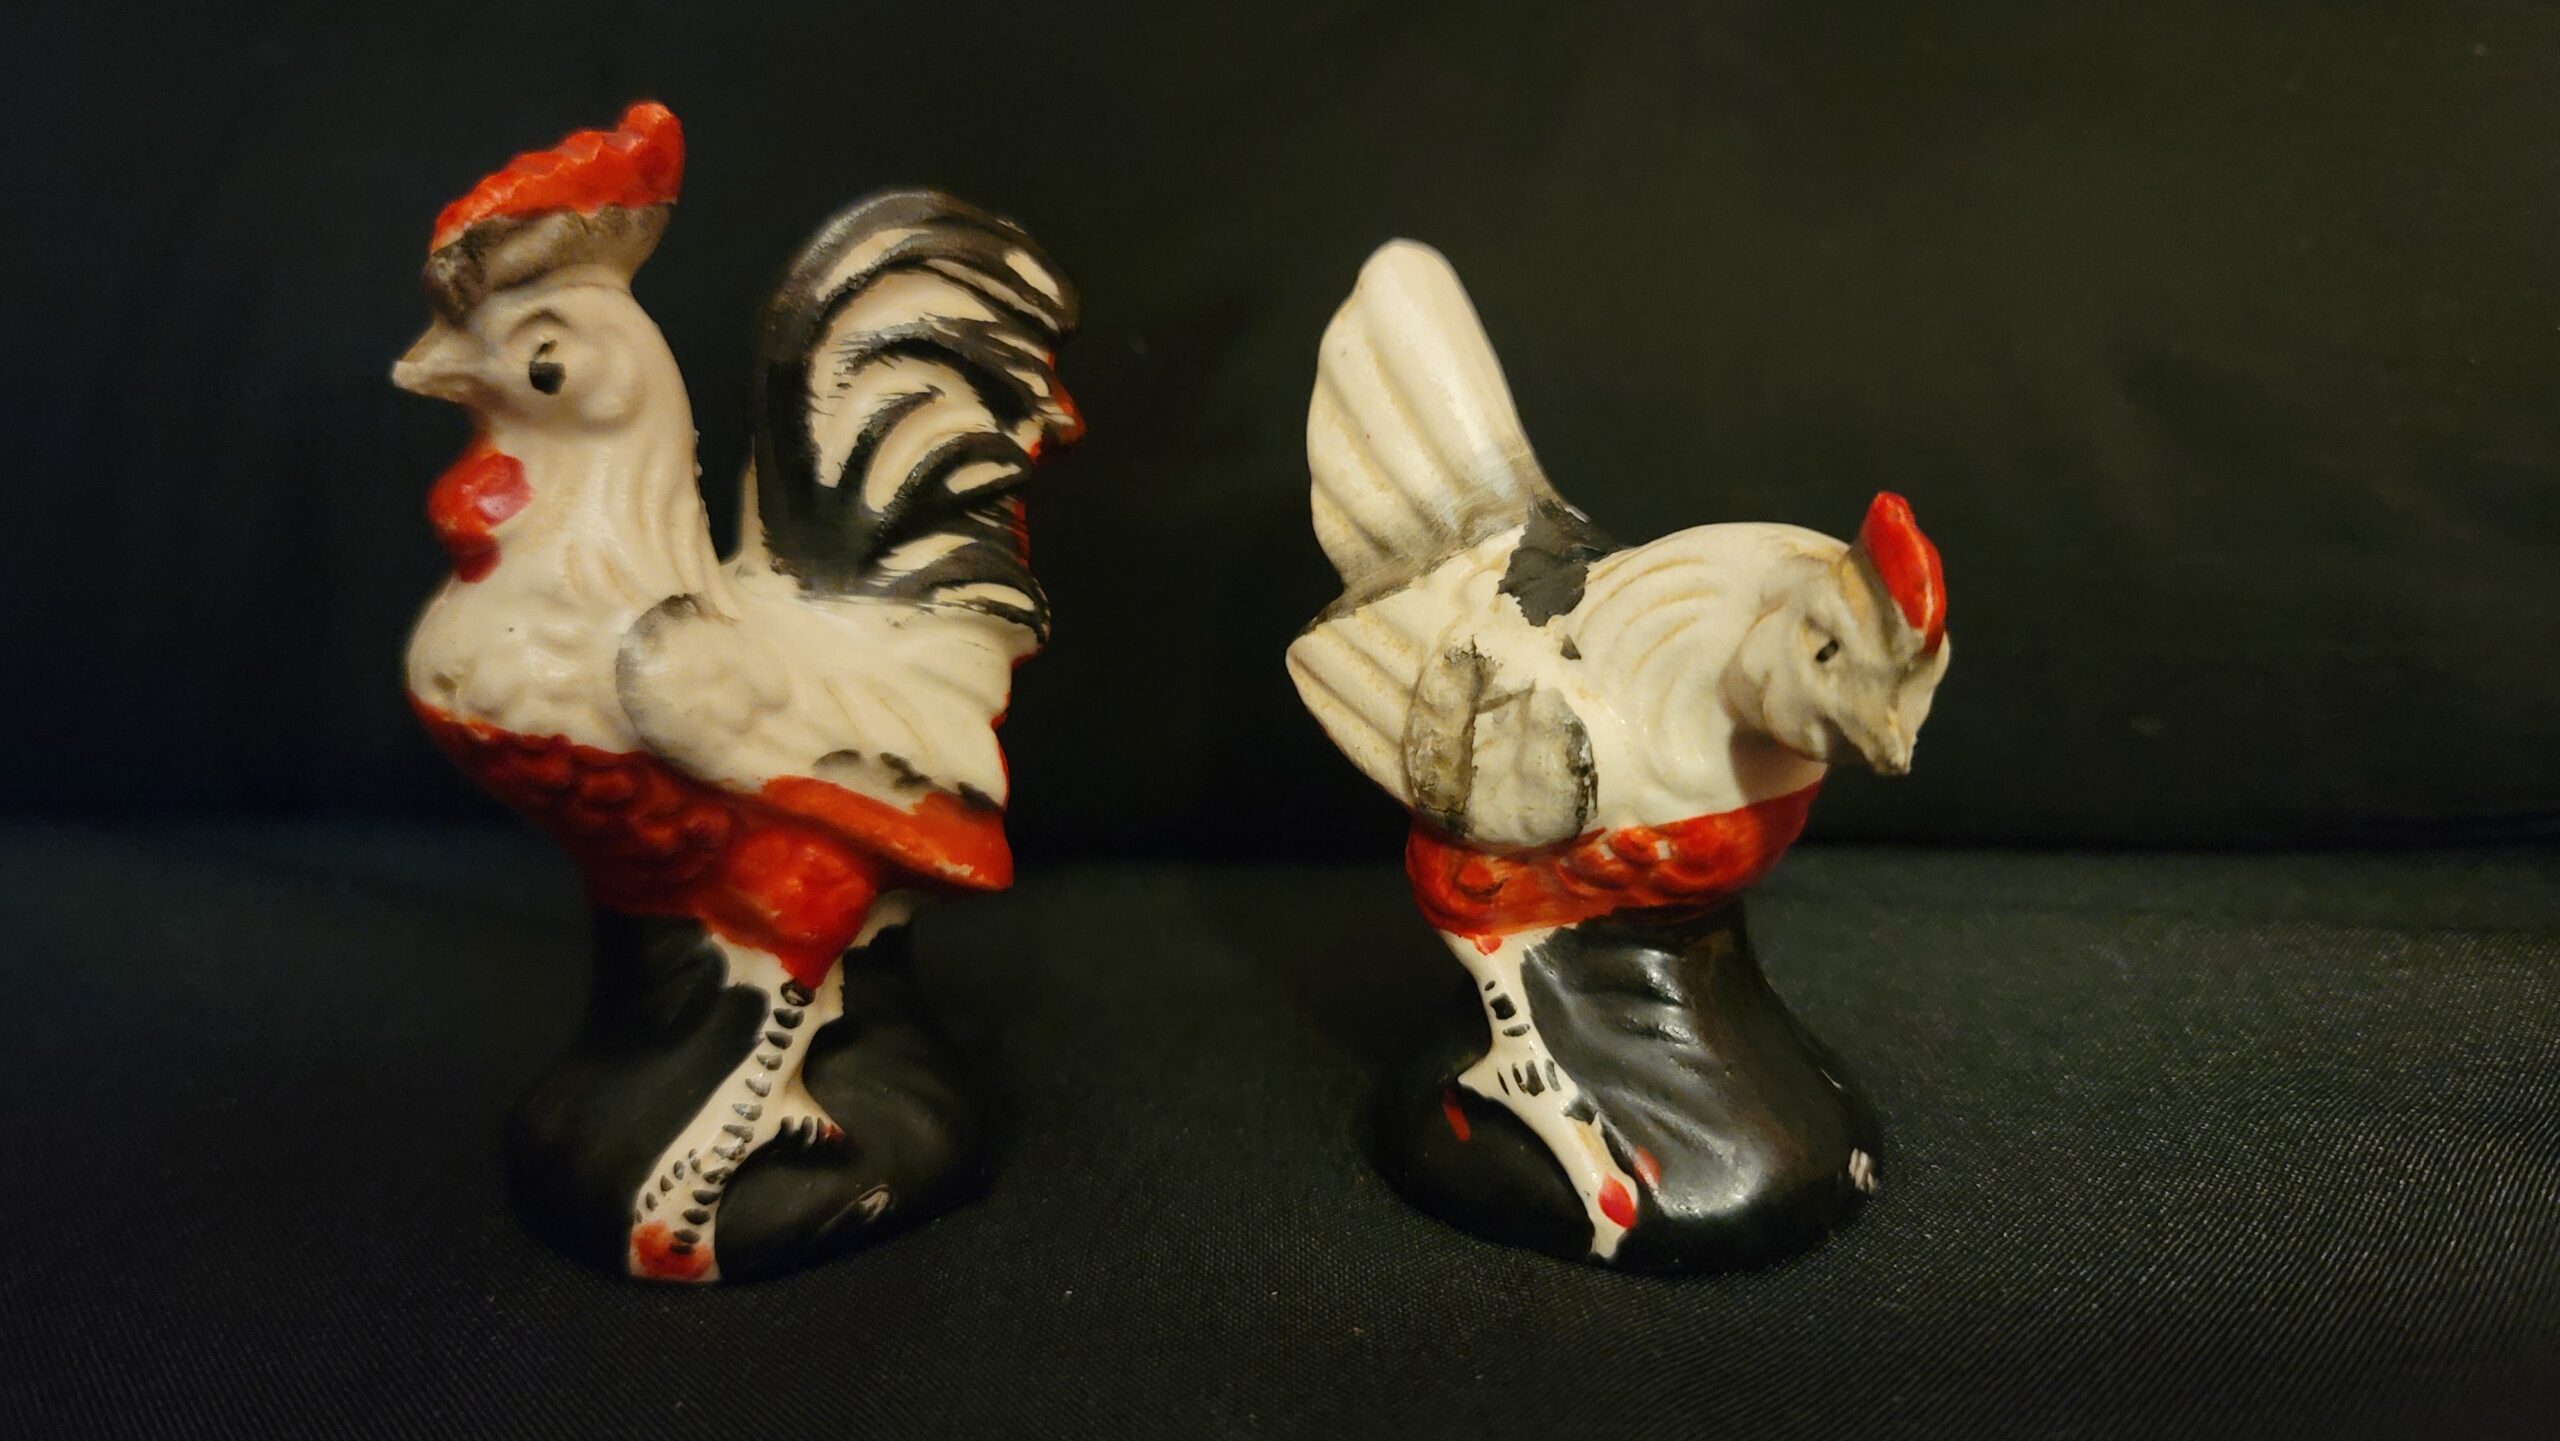 Vintage Salt and Pepper Shakers / Rooster and Hen